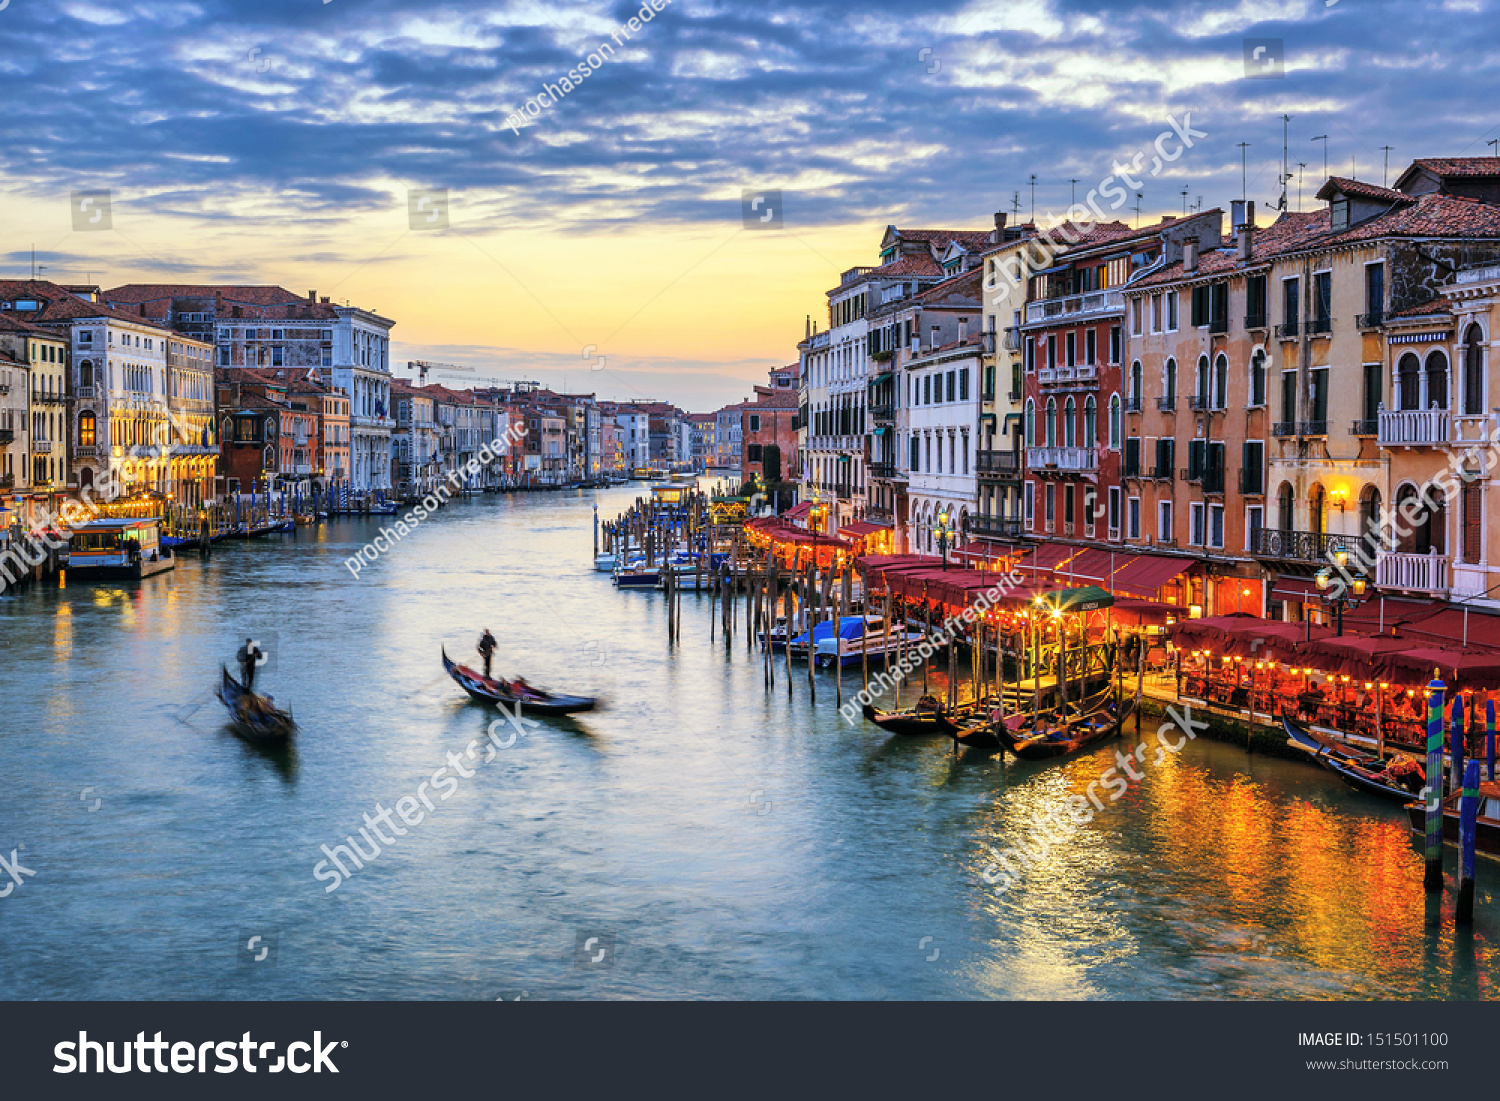 View of Grand Canal with gondolas at sunset in Venice #151501100